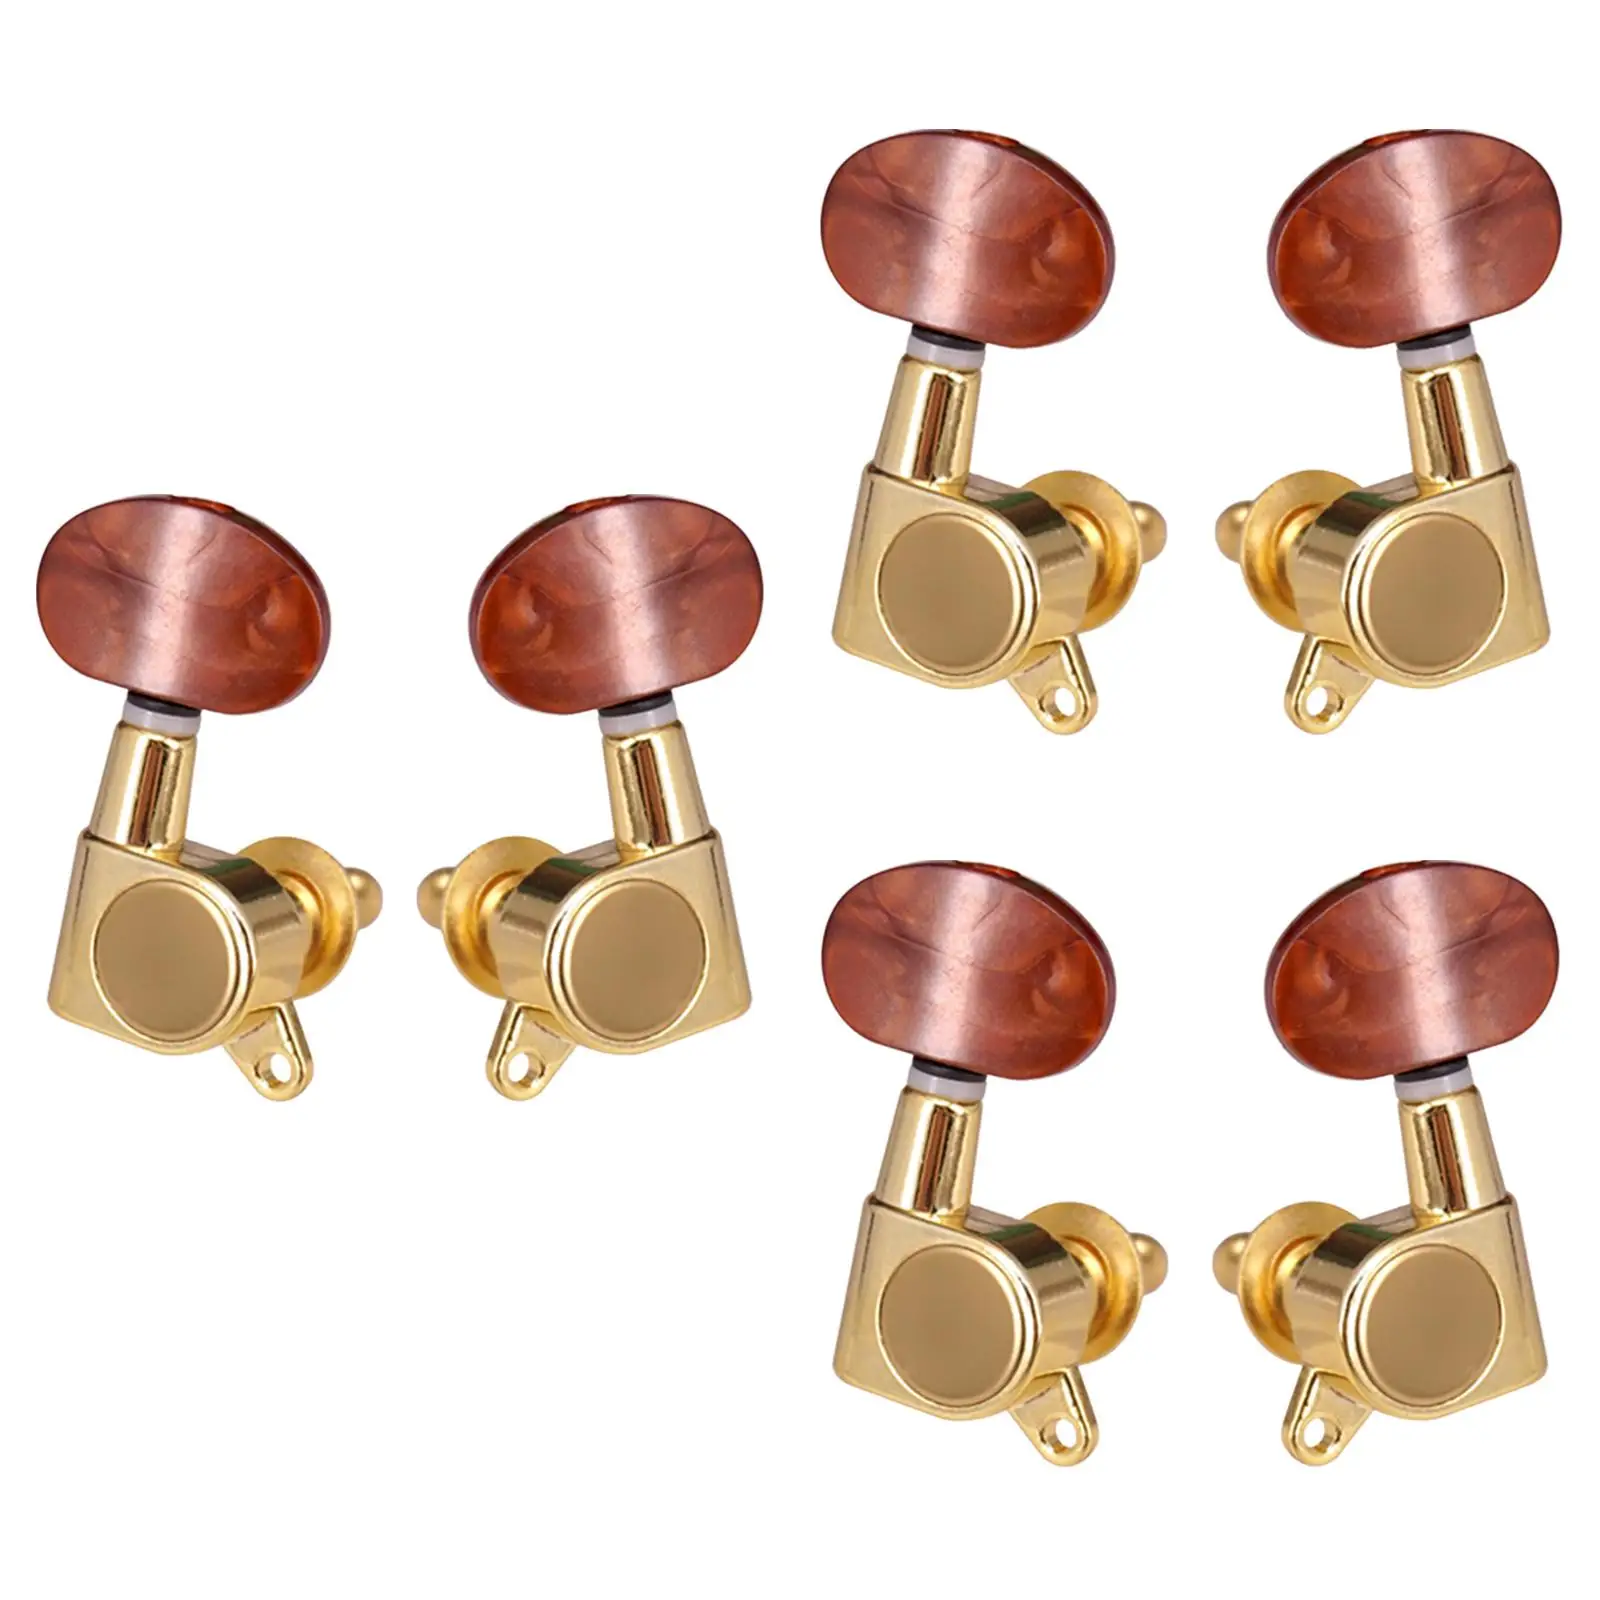 Replacement Guitar Tuning Pegs Closed Knob Enclosed Locking Tuners for Electric Guitar Parts